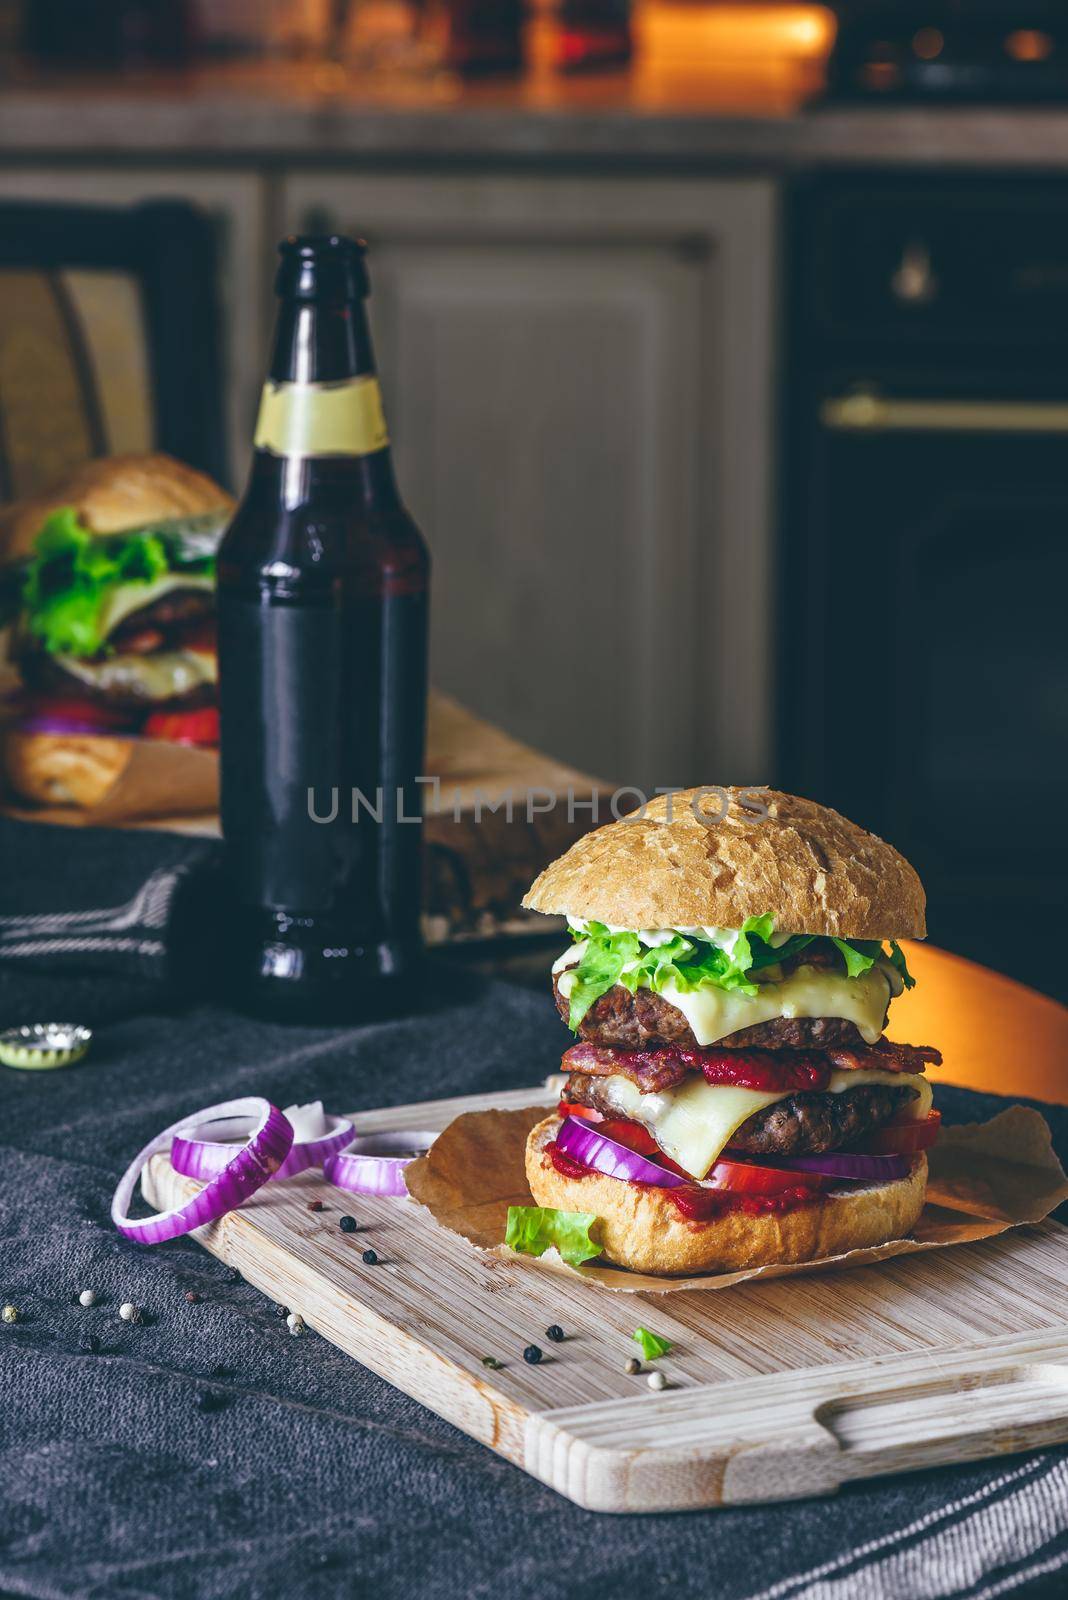 Prepared Cheeseburger with Two Beef Patties on Cutting Board. Bottle of Beer and Some Ingredients on Table.